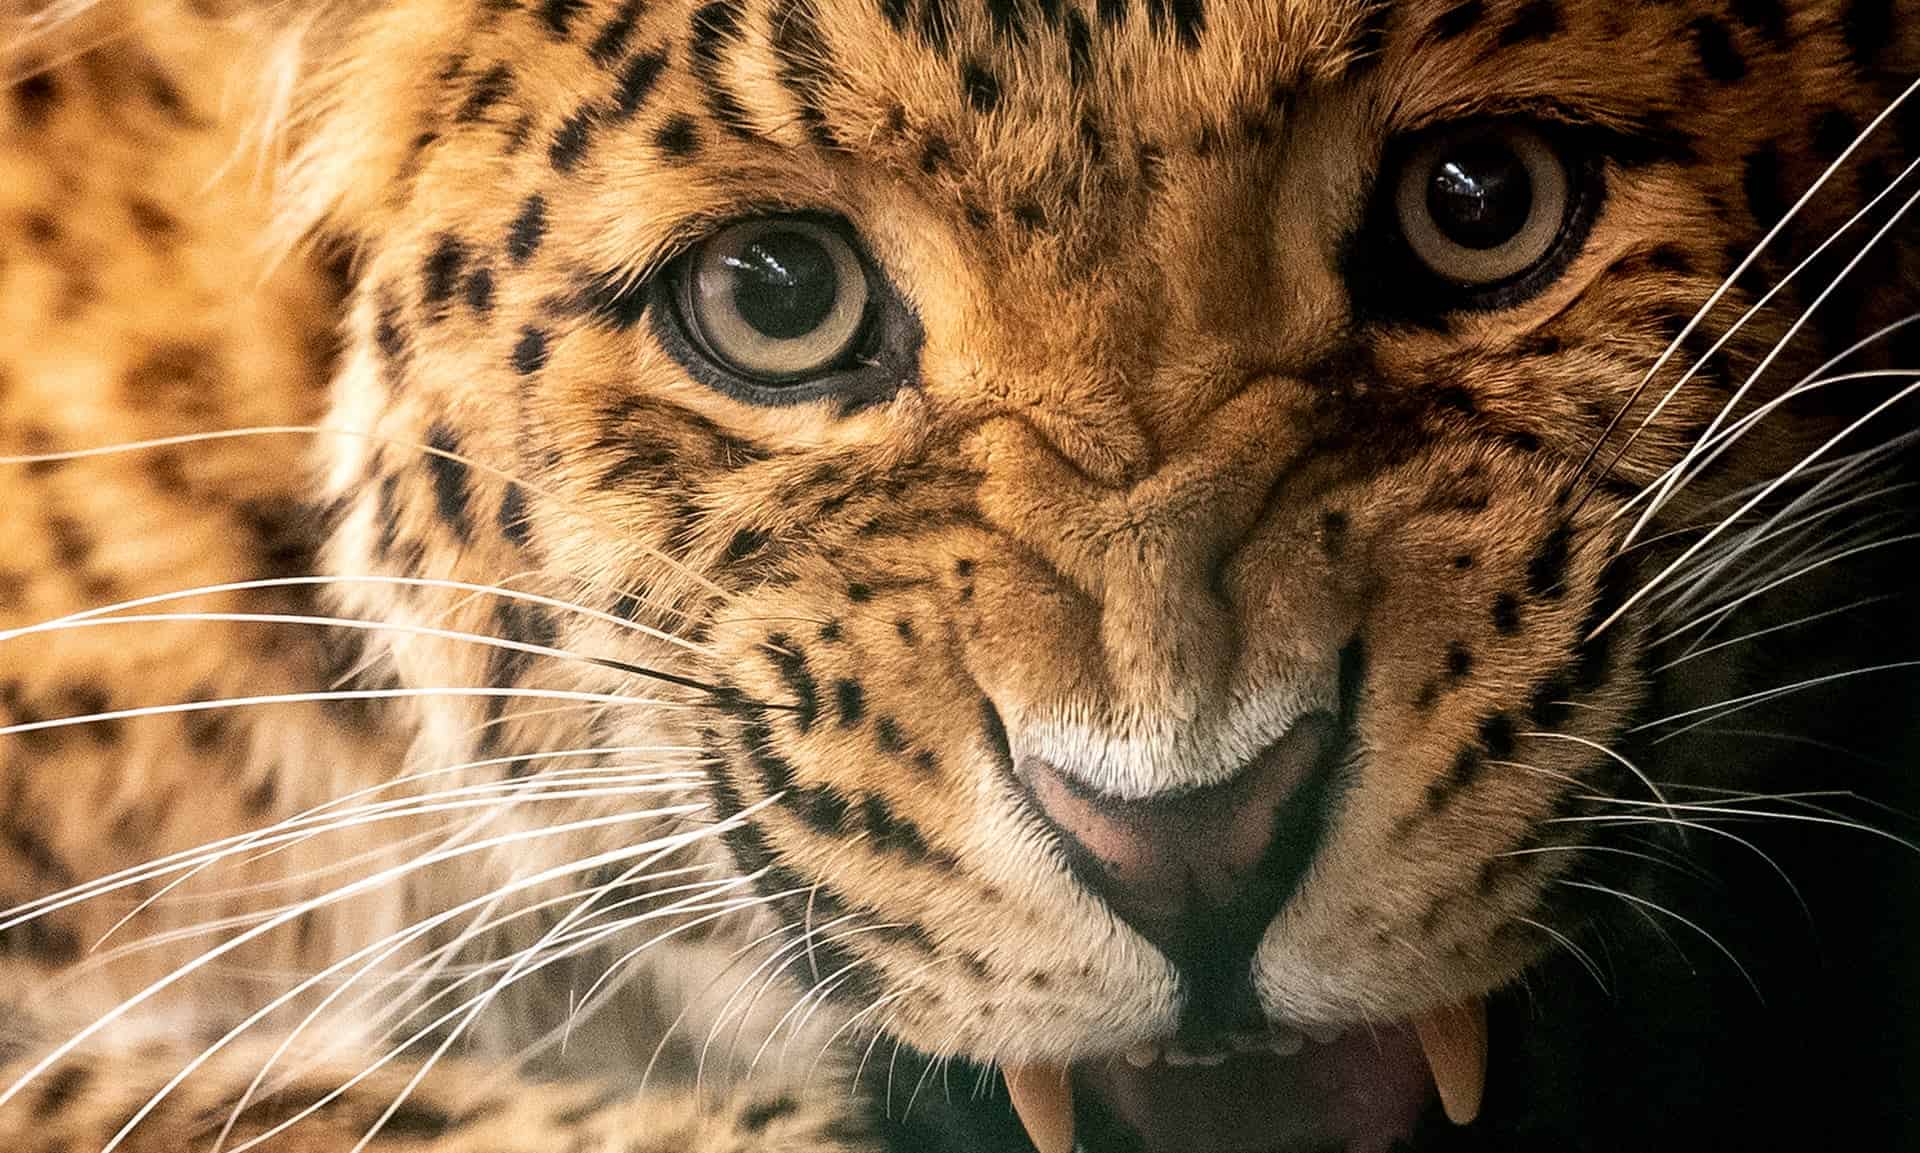 Wildlife traffickers target lion, jaguar and leopard body parts as tiger substitutes